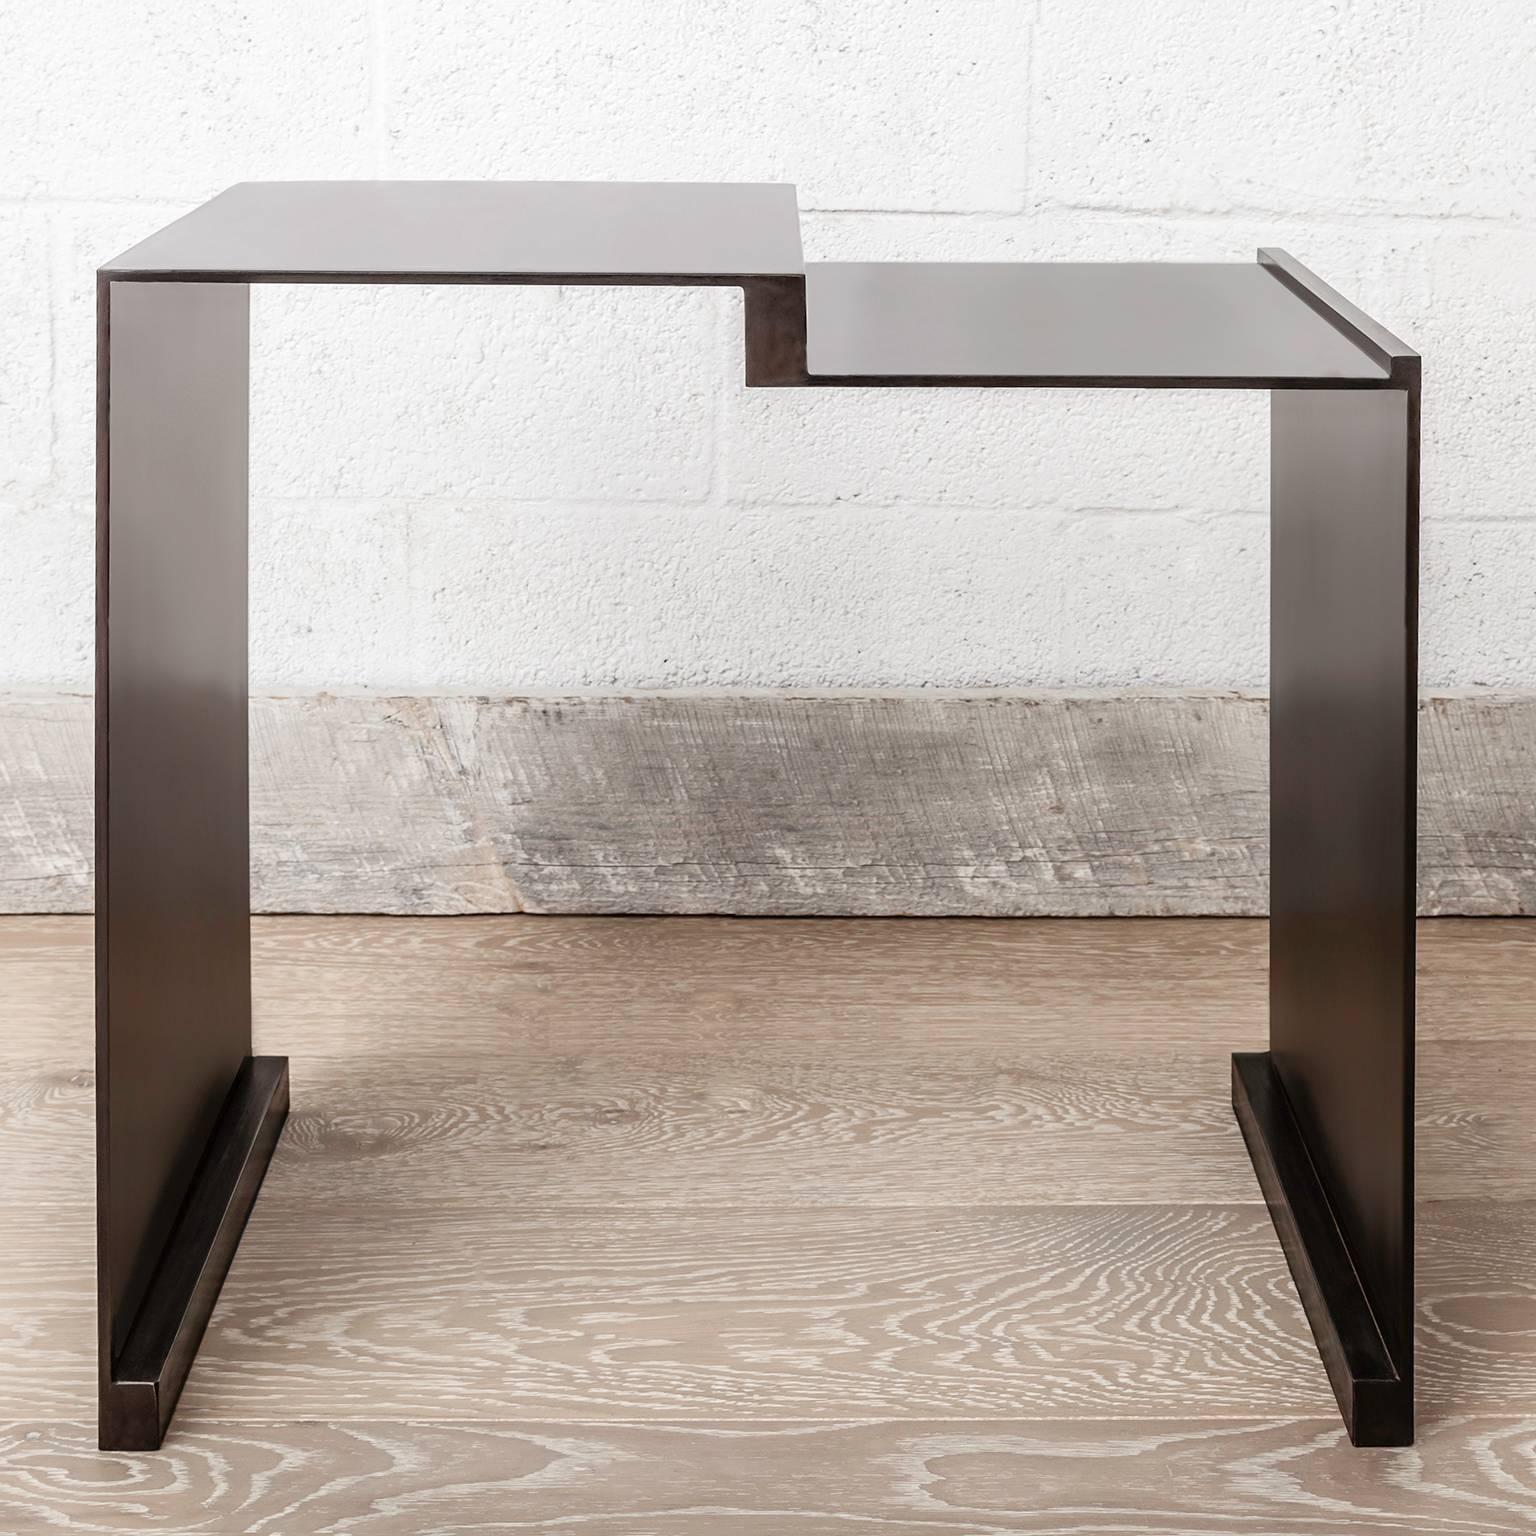 The Roque side table evokes a warm modern elegance with simple lines and solid materials. The body structure is composed of a blackened steel plate in  various segments that create a minimalist sculptural form. It is offered with or without a solid